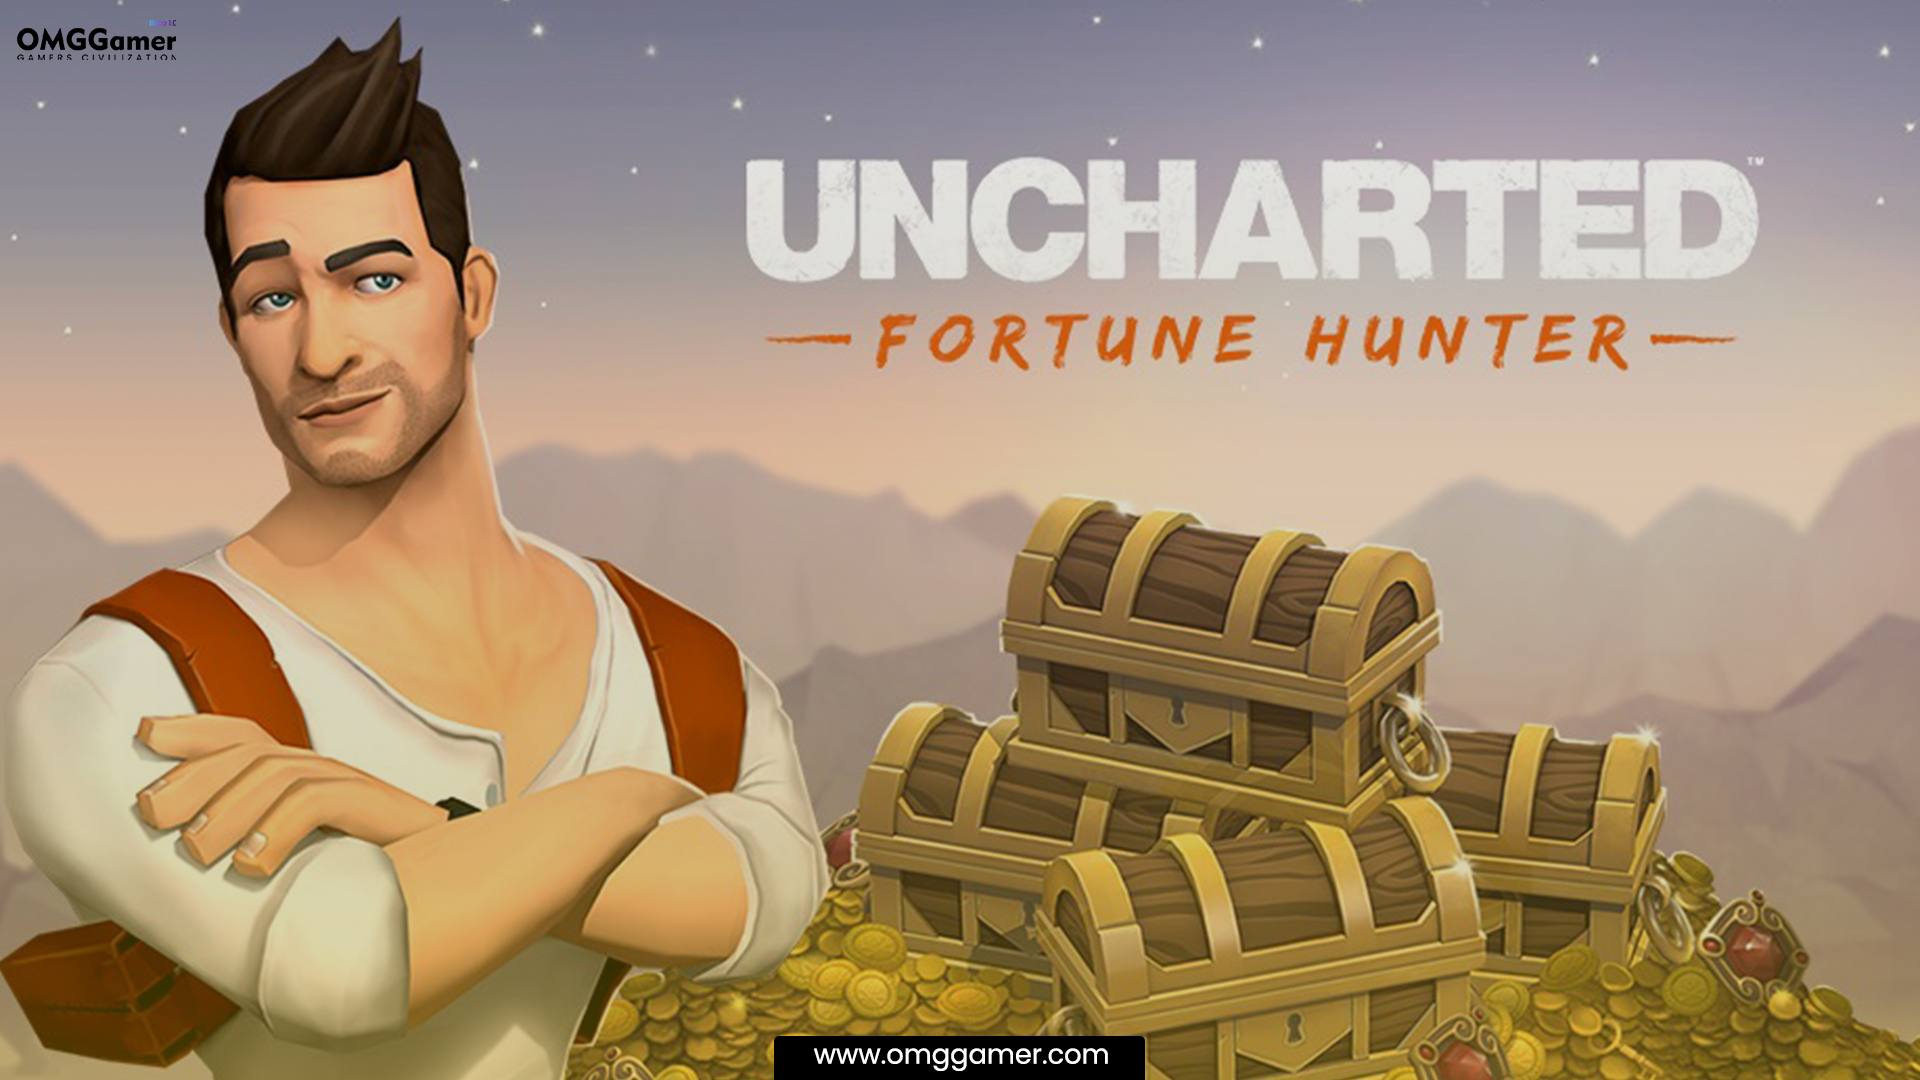 Uncharted Fortune Hunter – 2016 (spin-off)